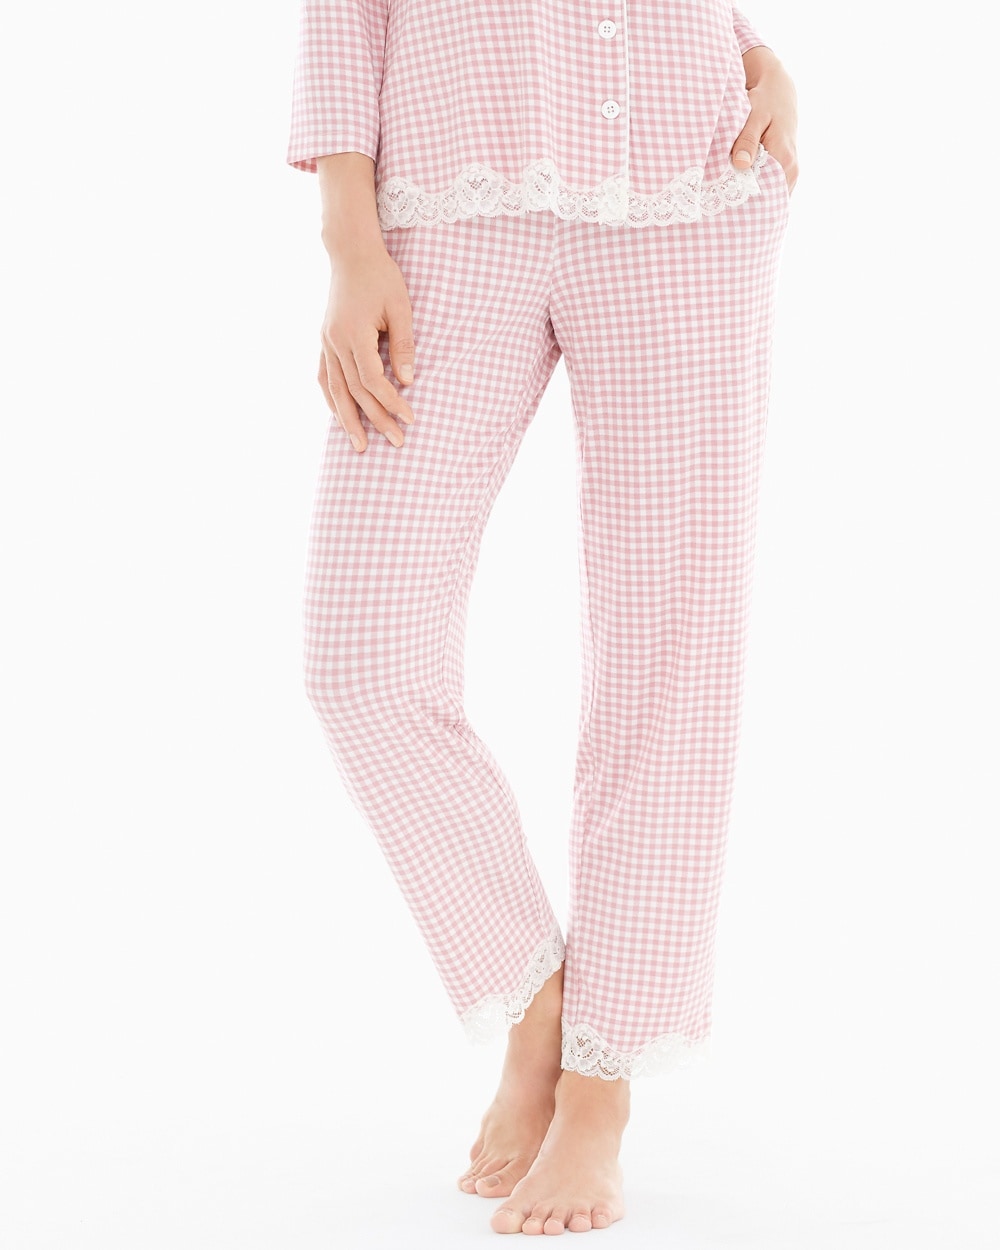 Embraceable Cool Nights Lace Trim Ankle Pajama Pants Gingham Blush Pink